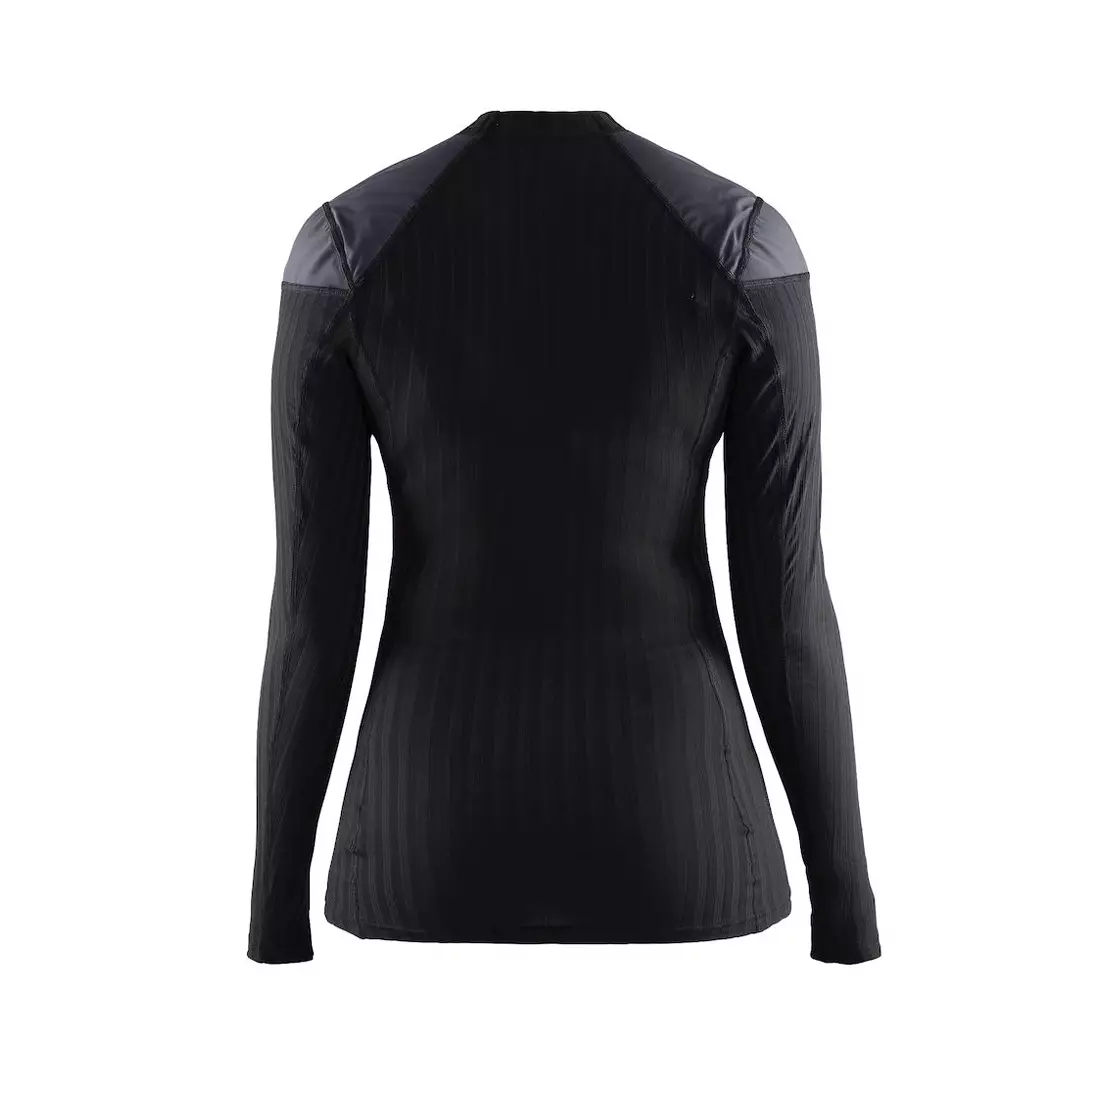 CRAFT BE ACTIVE EXTREME 2.0 WINDSTOPPER women's T-shirt 1904500-9999